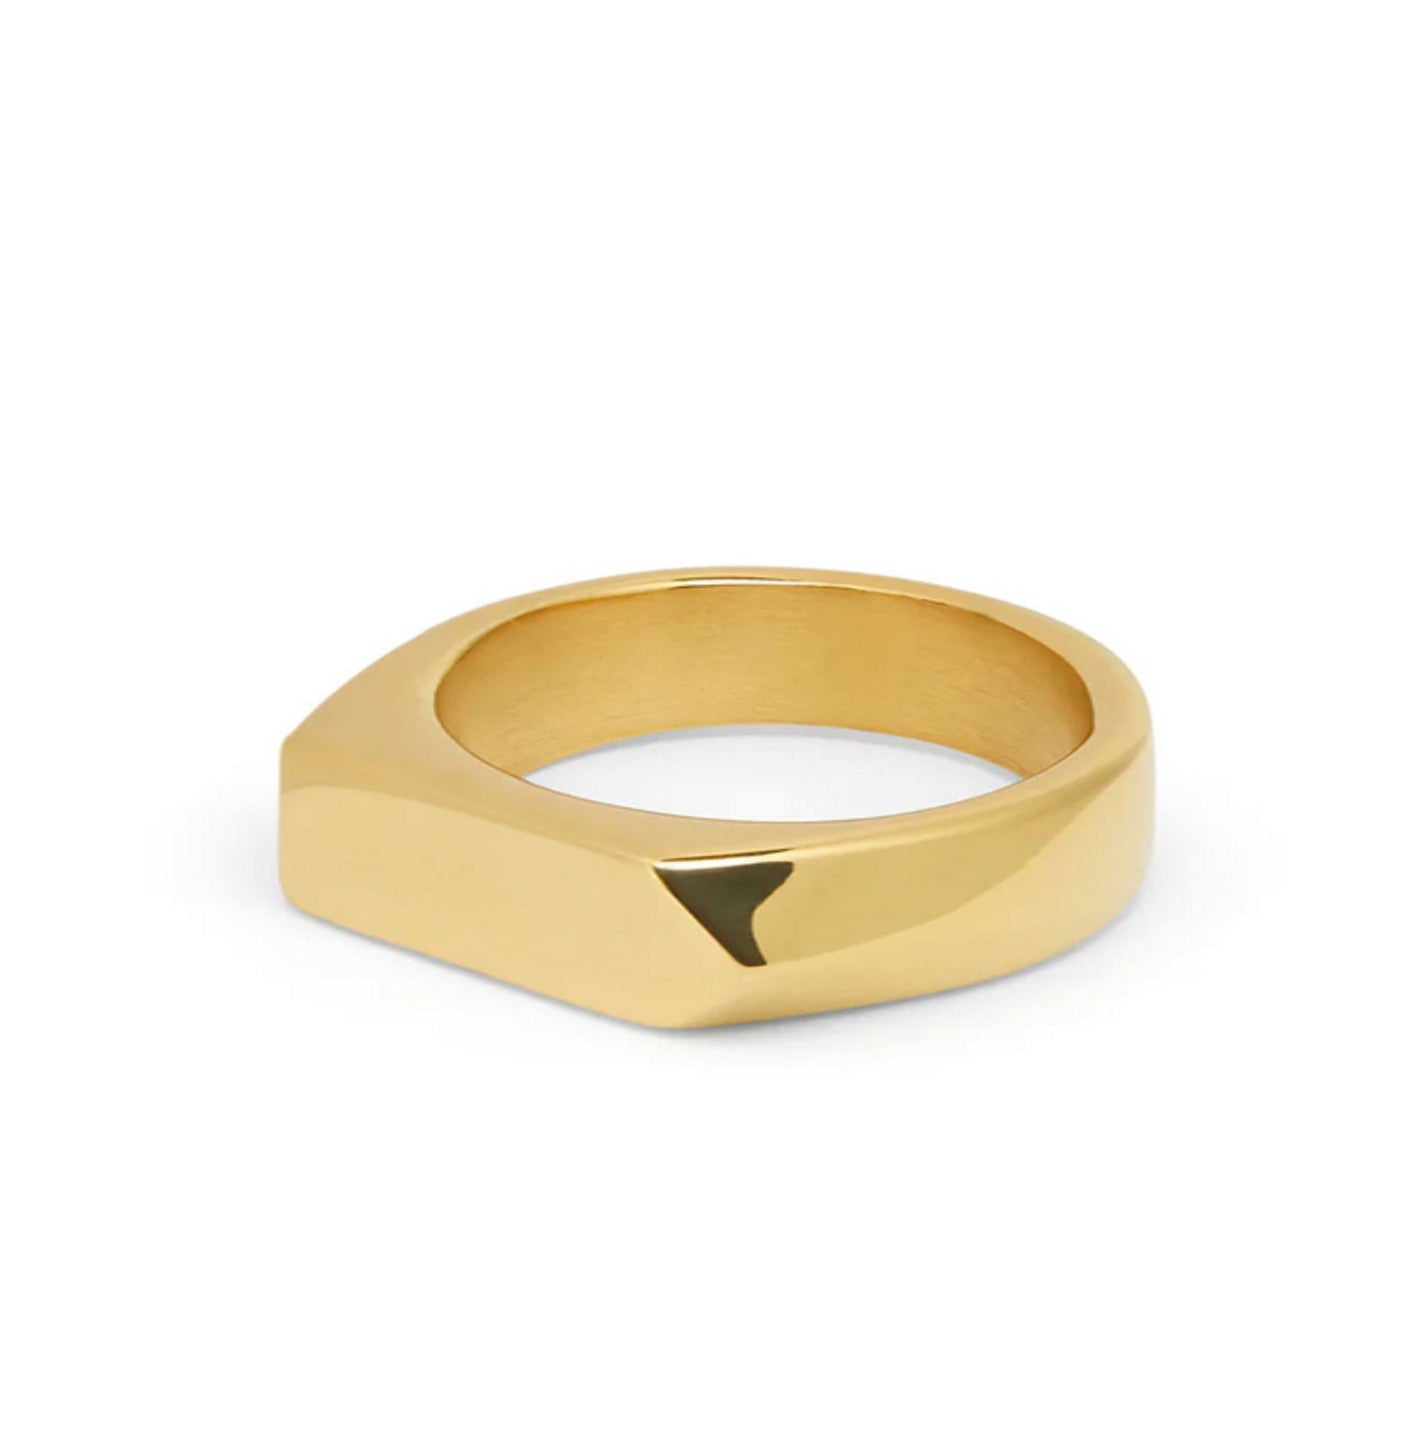 FLAT TOP RING - GOLD ring Yubama Jewelry Online Store - The Elegant Designs of Gold and Silver ! Gold 10 